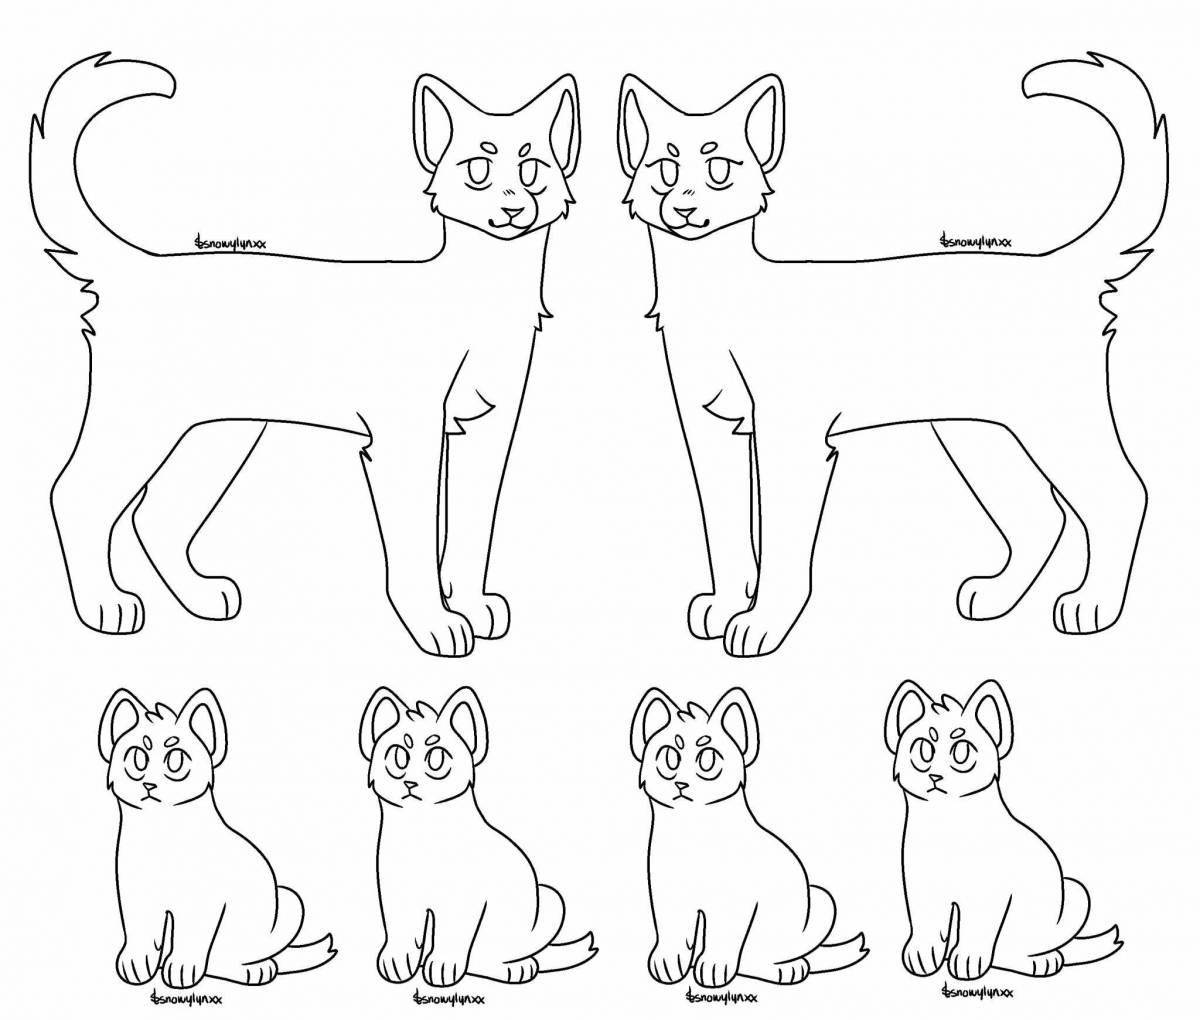 Coloring cat family games